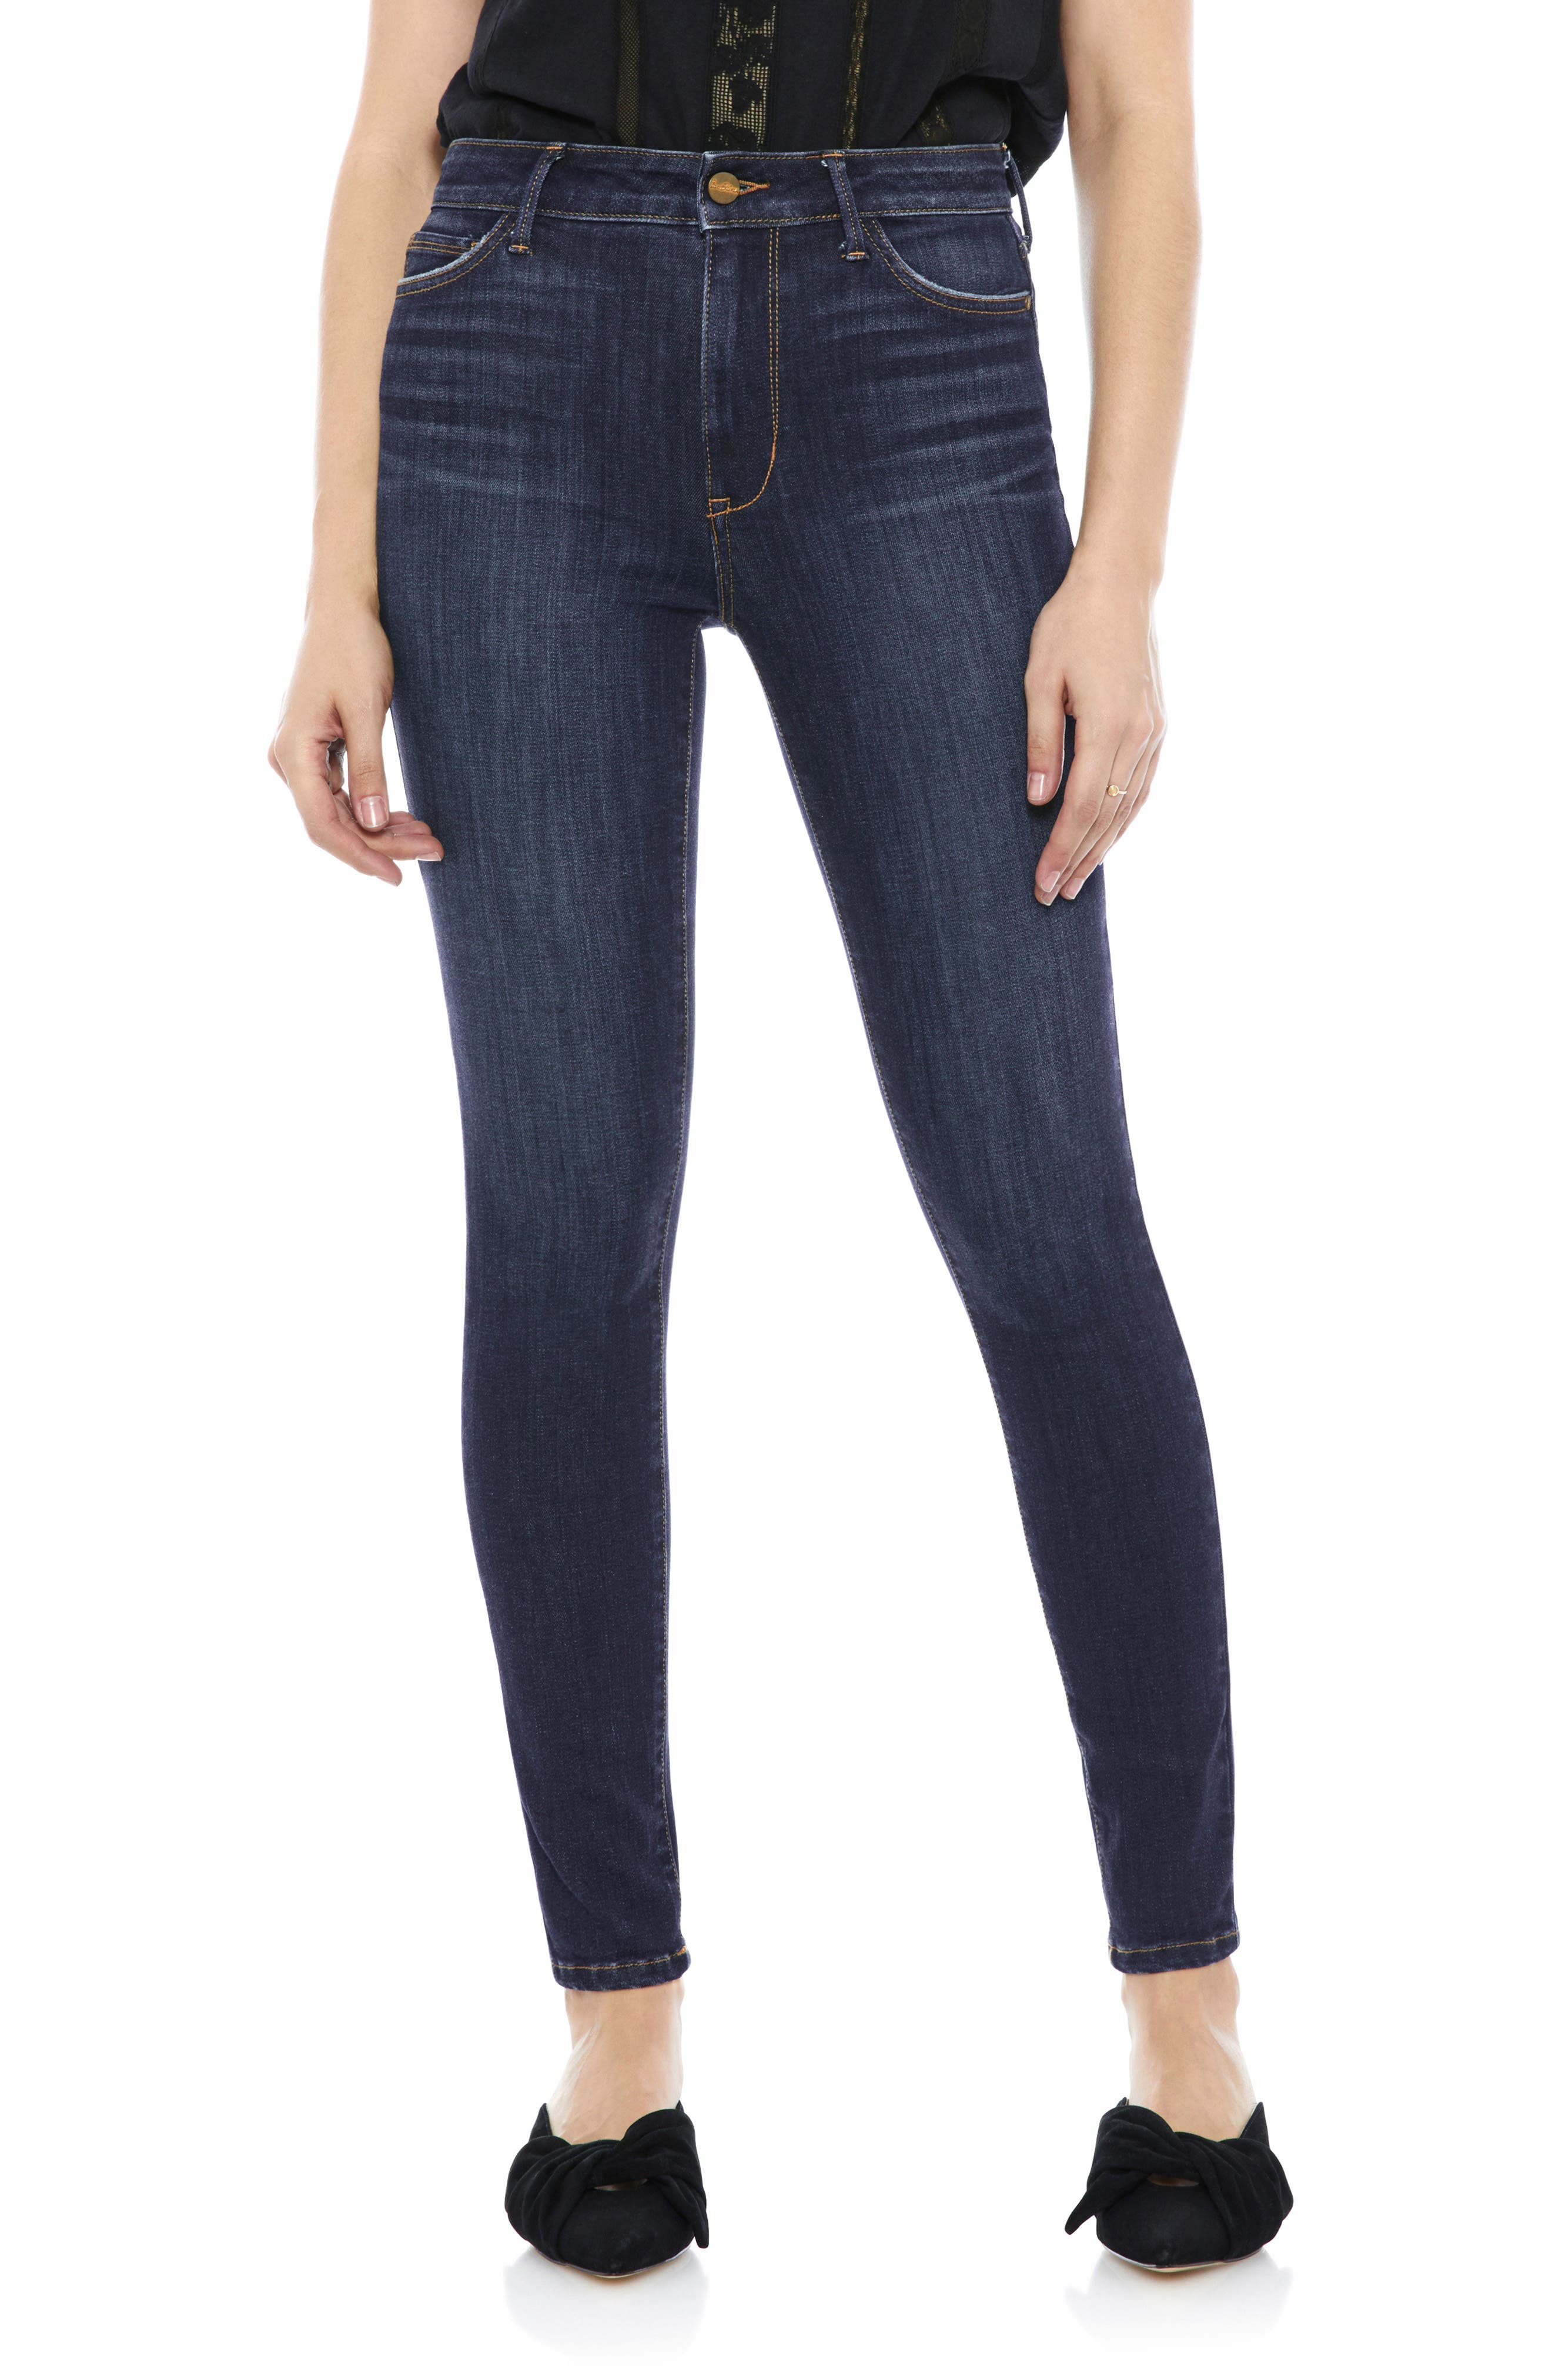 knee cut jeans for girls